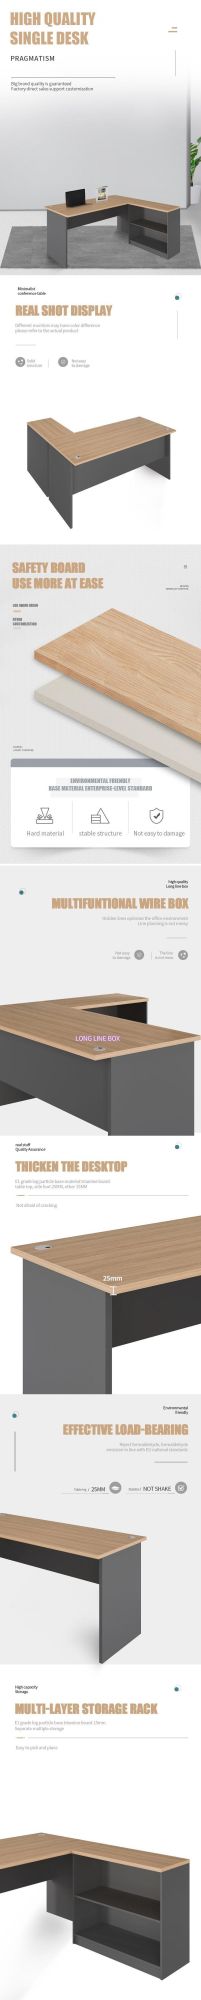 L-Shaped Modern MDF Melamine Top Study Table Computer Desk for Home and Living Room